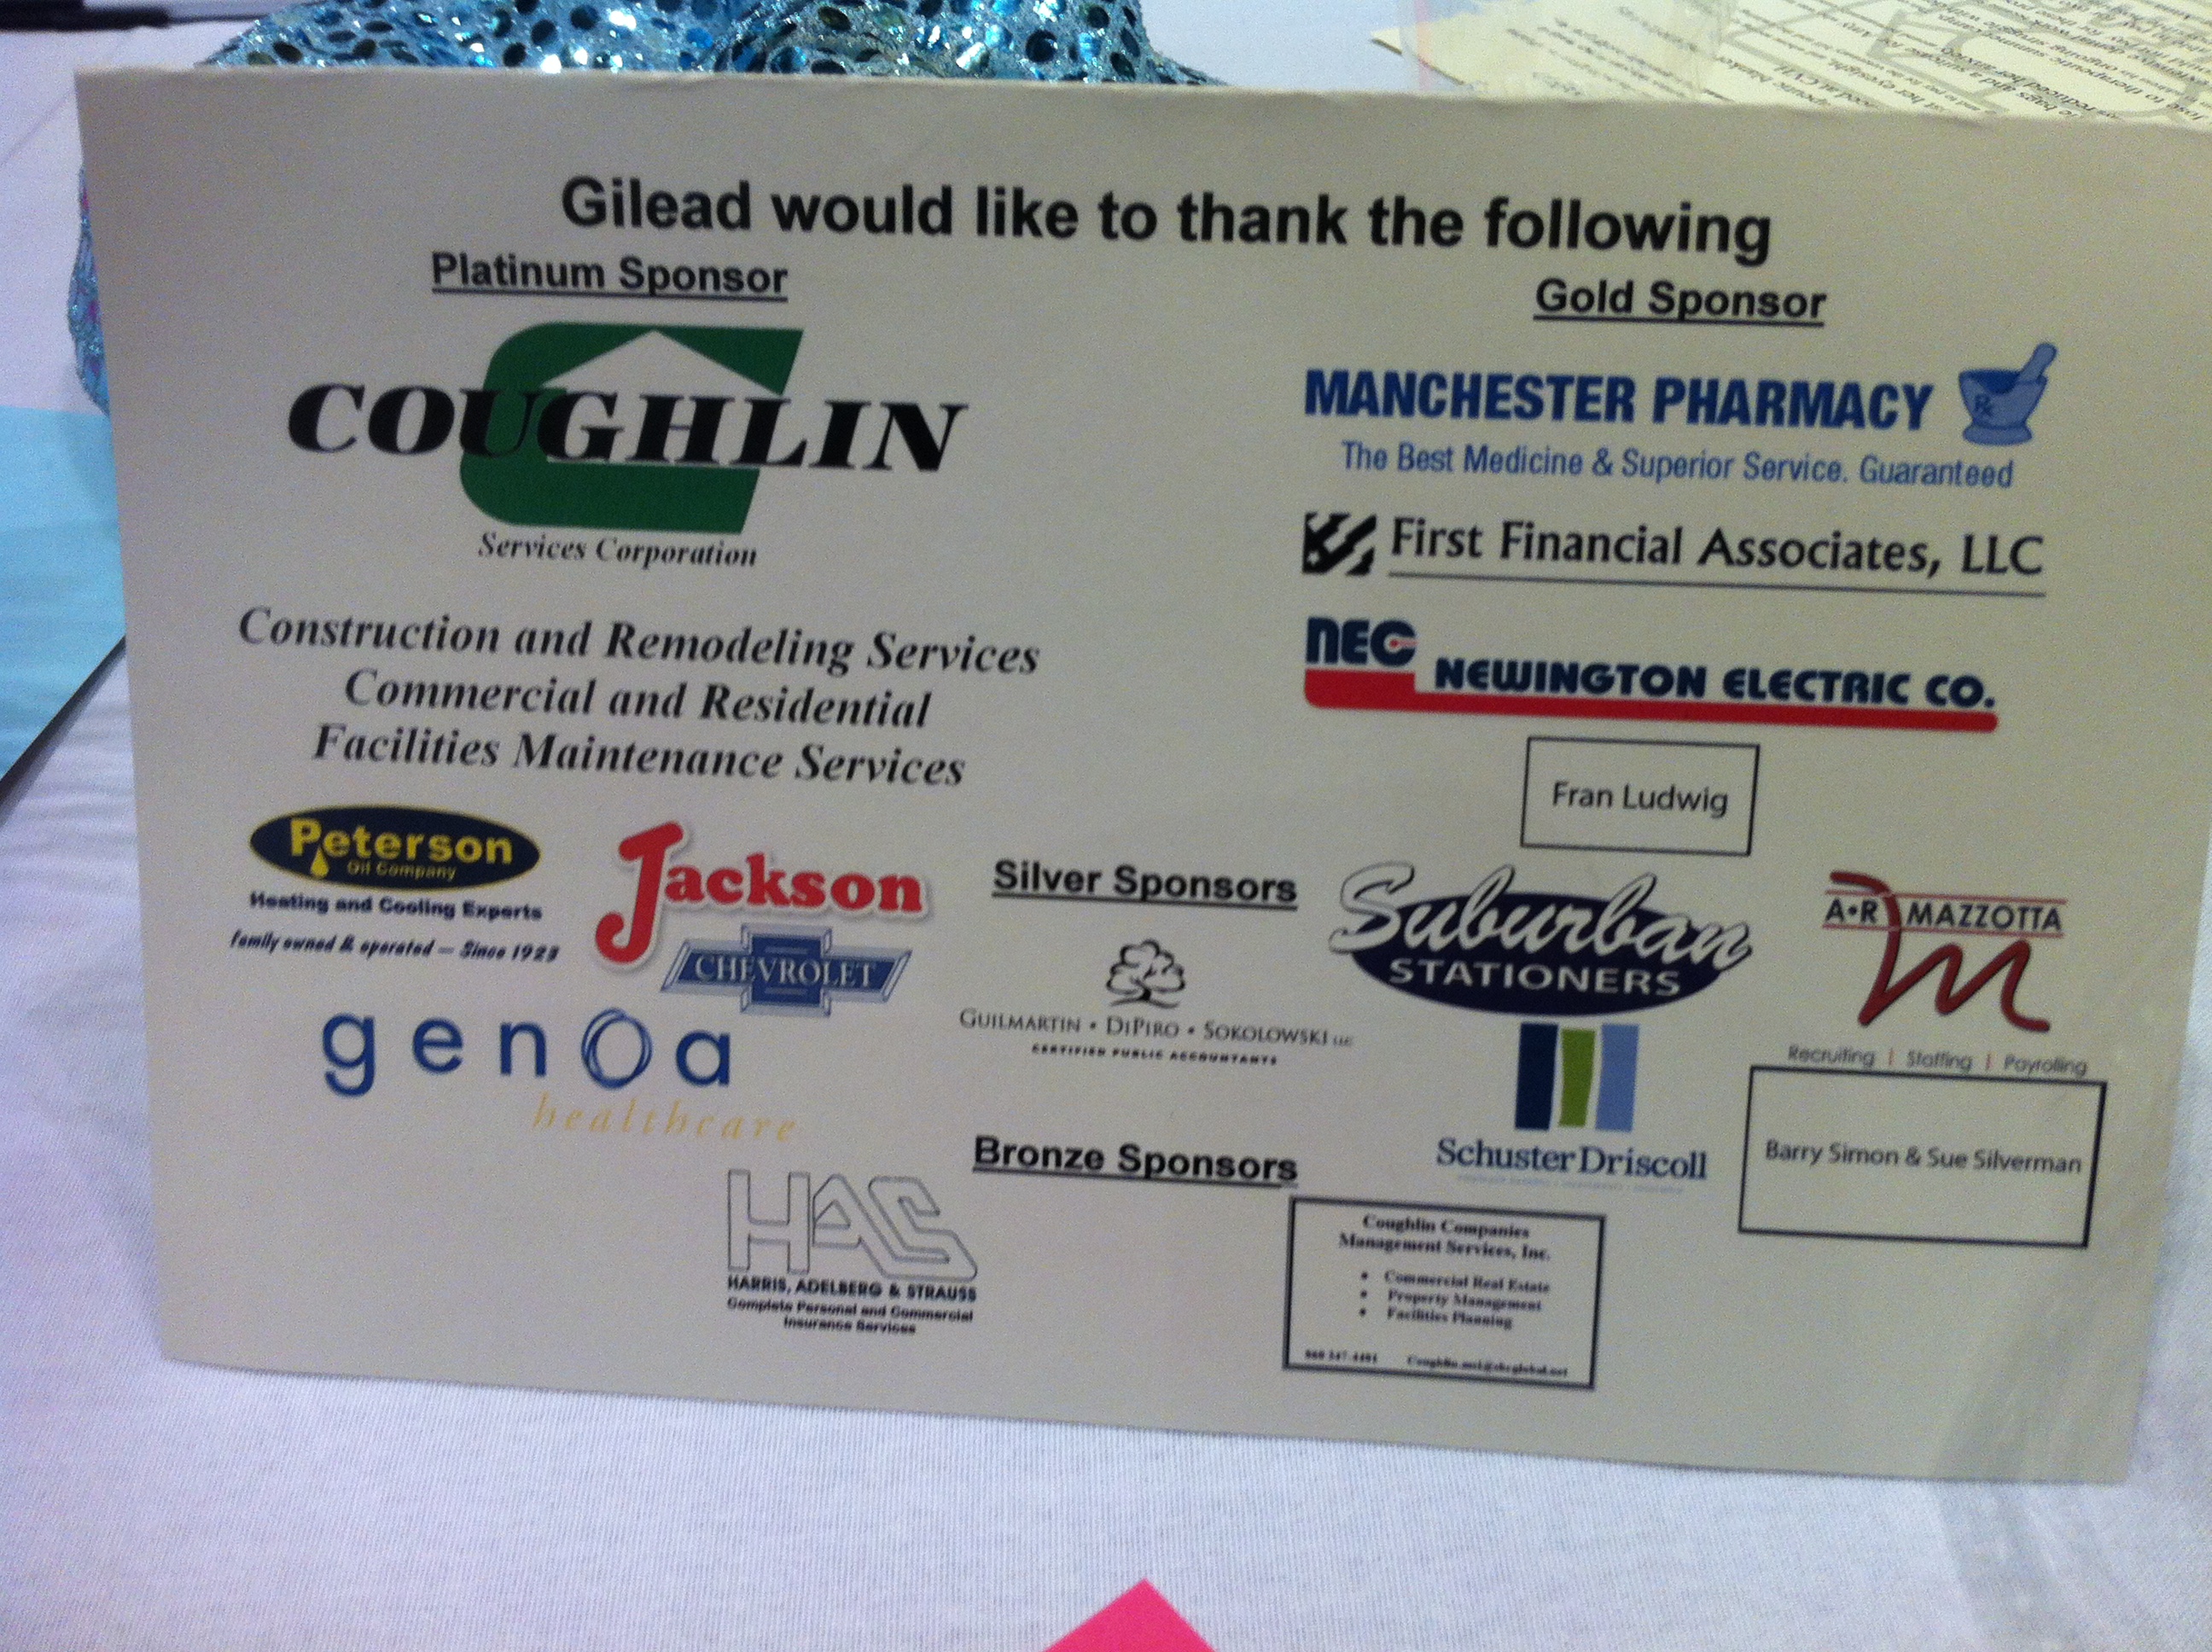 Coughlin Service Corp of Middletown CT becomes Gold Sponsor of Gilead Community Services 2012 Quizine for a Cause